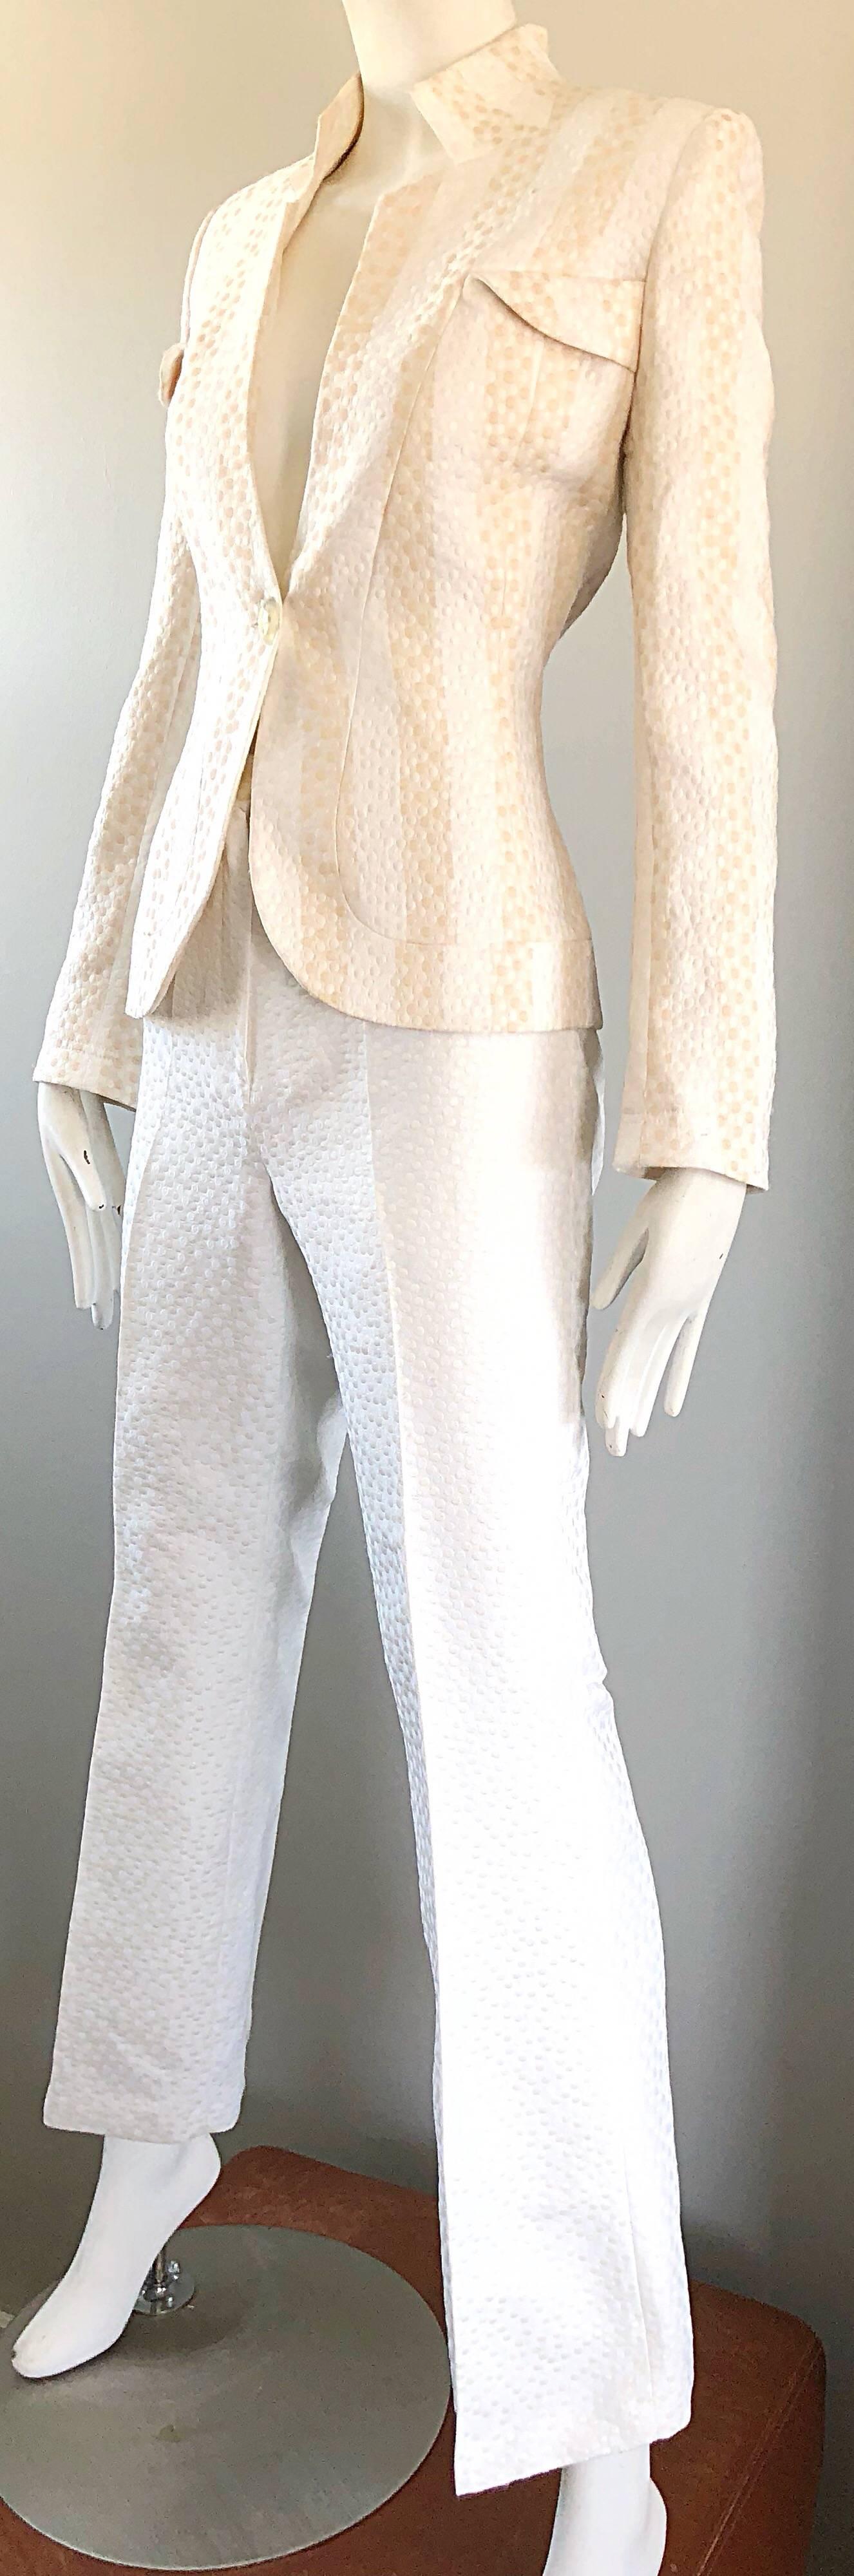 Vintage Max Nugus Couture 1990s White + Beige Polka Dot 90s Tailored Pant Suit 2